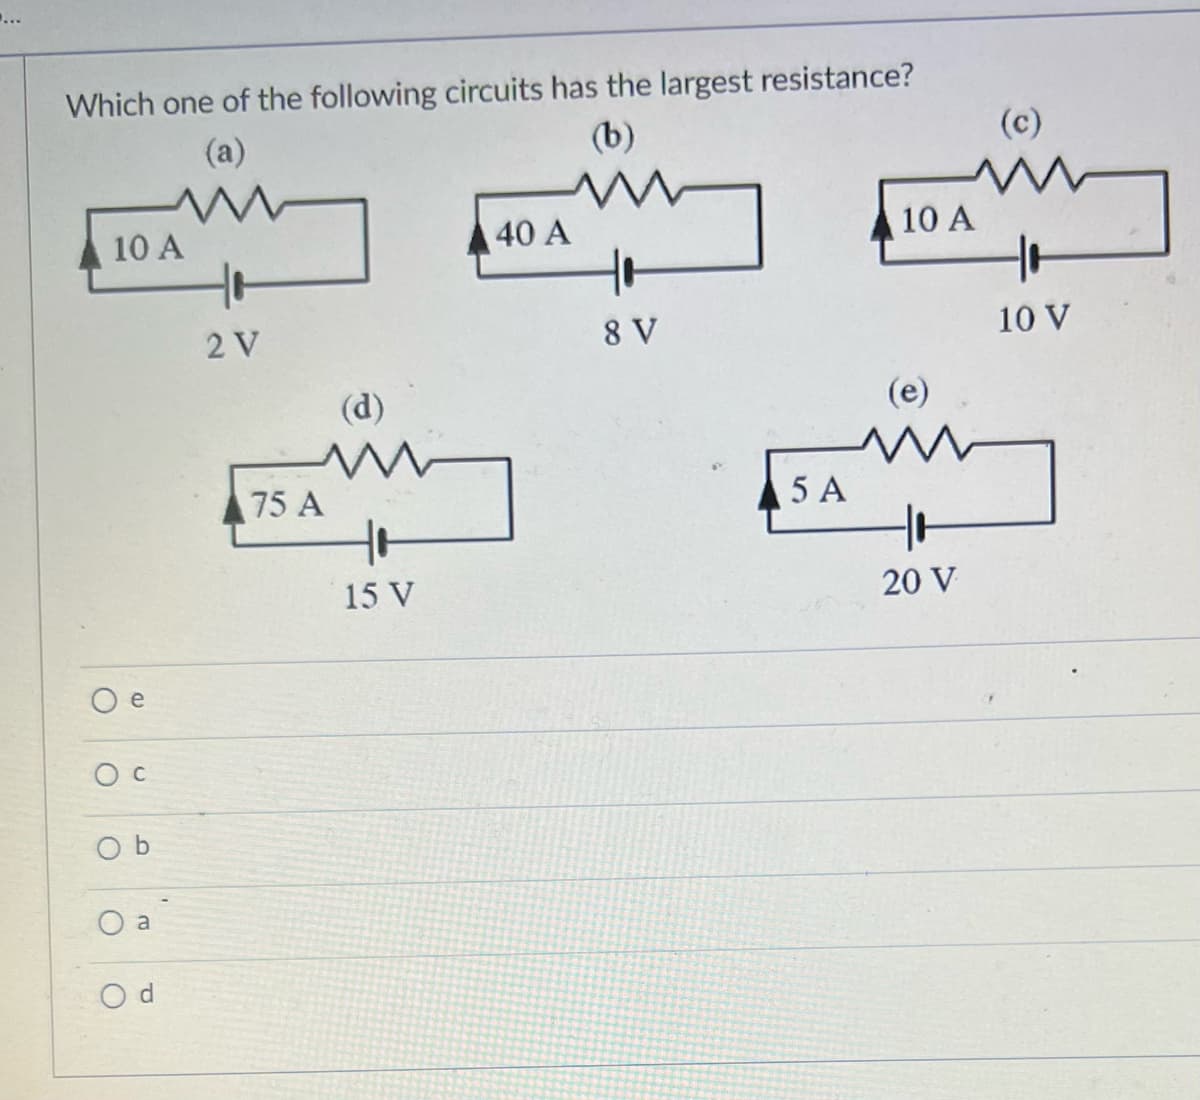 Which one of the following circuits has the largest resistance?
(b)
(a)
M
www
10 A
O
O C
Ob
O
a
2 V
7
75 A
(d)
15 V
40 A
8 V
5 A
10 A
W
20 V
(c)
M
10 V